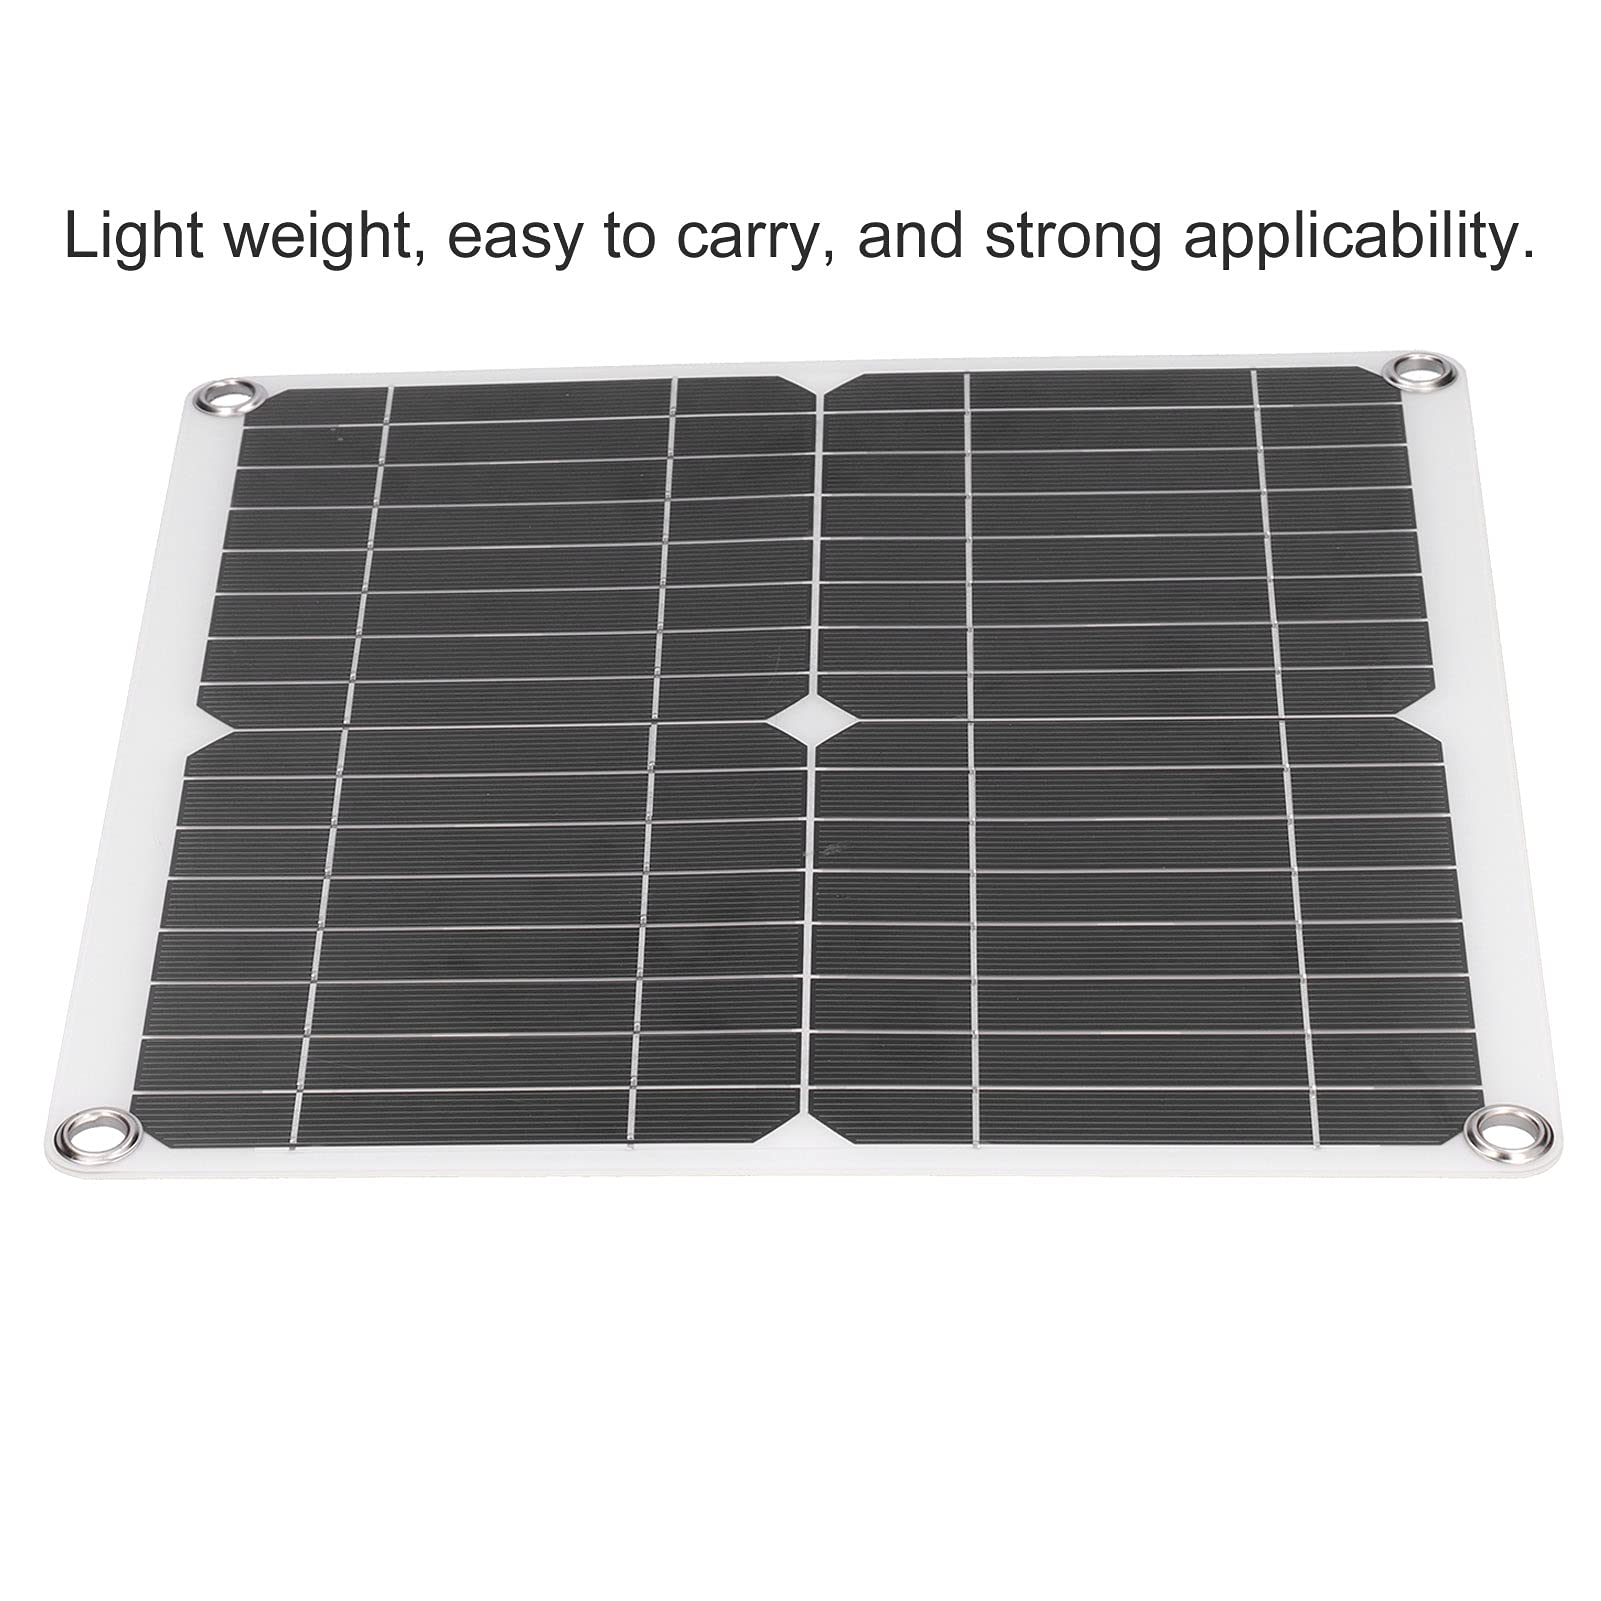 40W 18V IP65 Monocrystalline Solar & Wind Power Solar Panels Silicon Flexible Solar Panel with 20A Solar Charge Controller for Outdoor BikingMountaineeringHiking